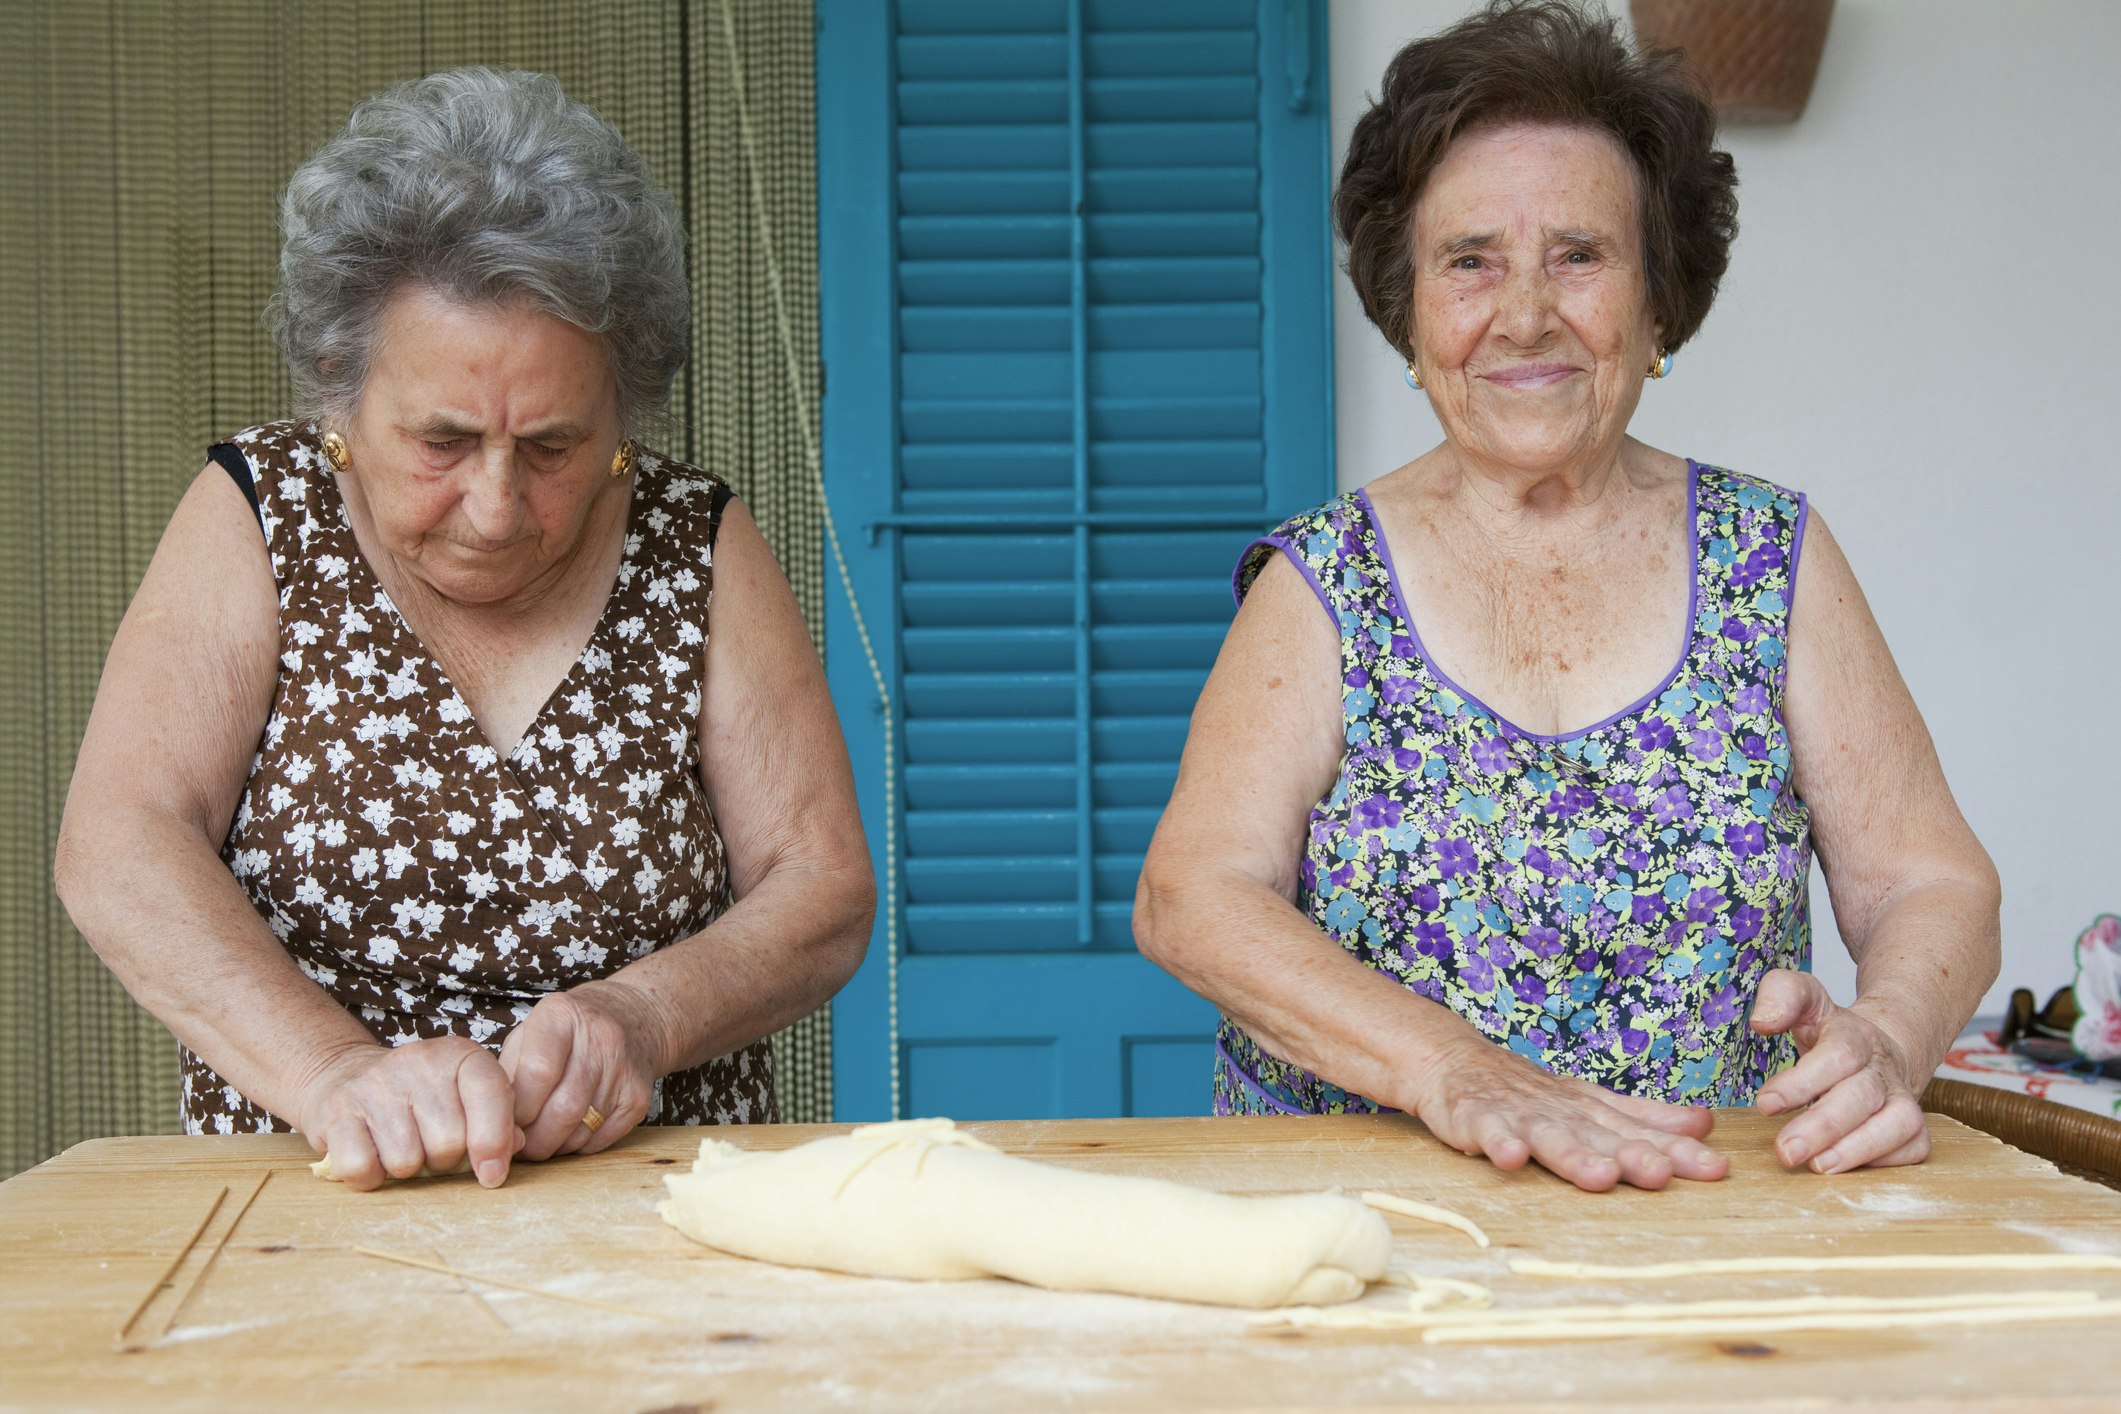 Two Sicilian women stand side by side making pasta together